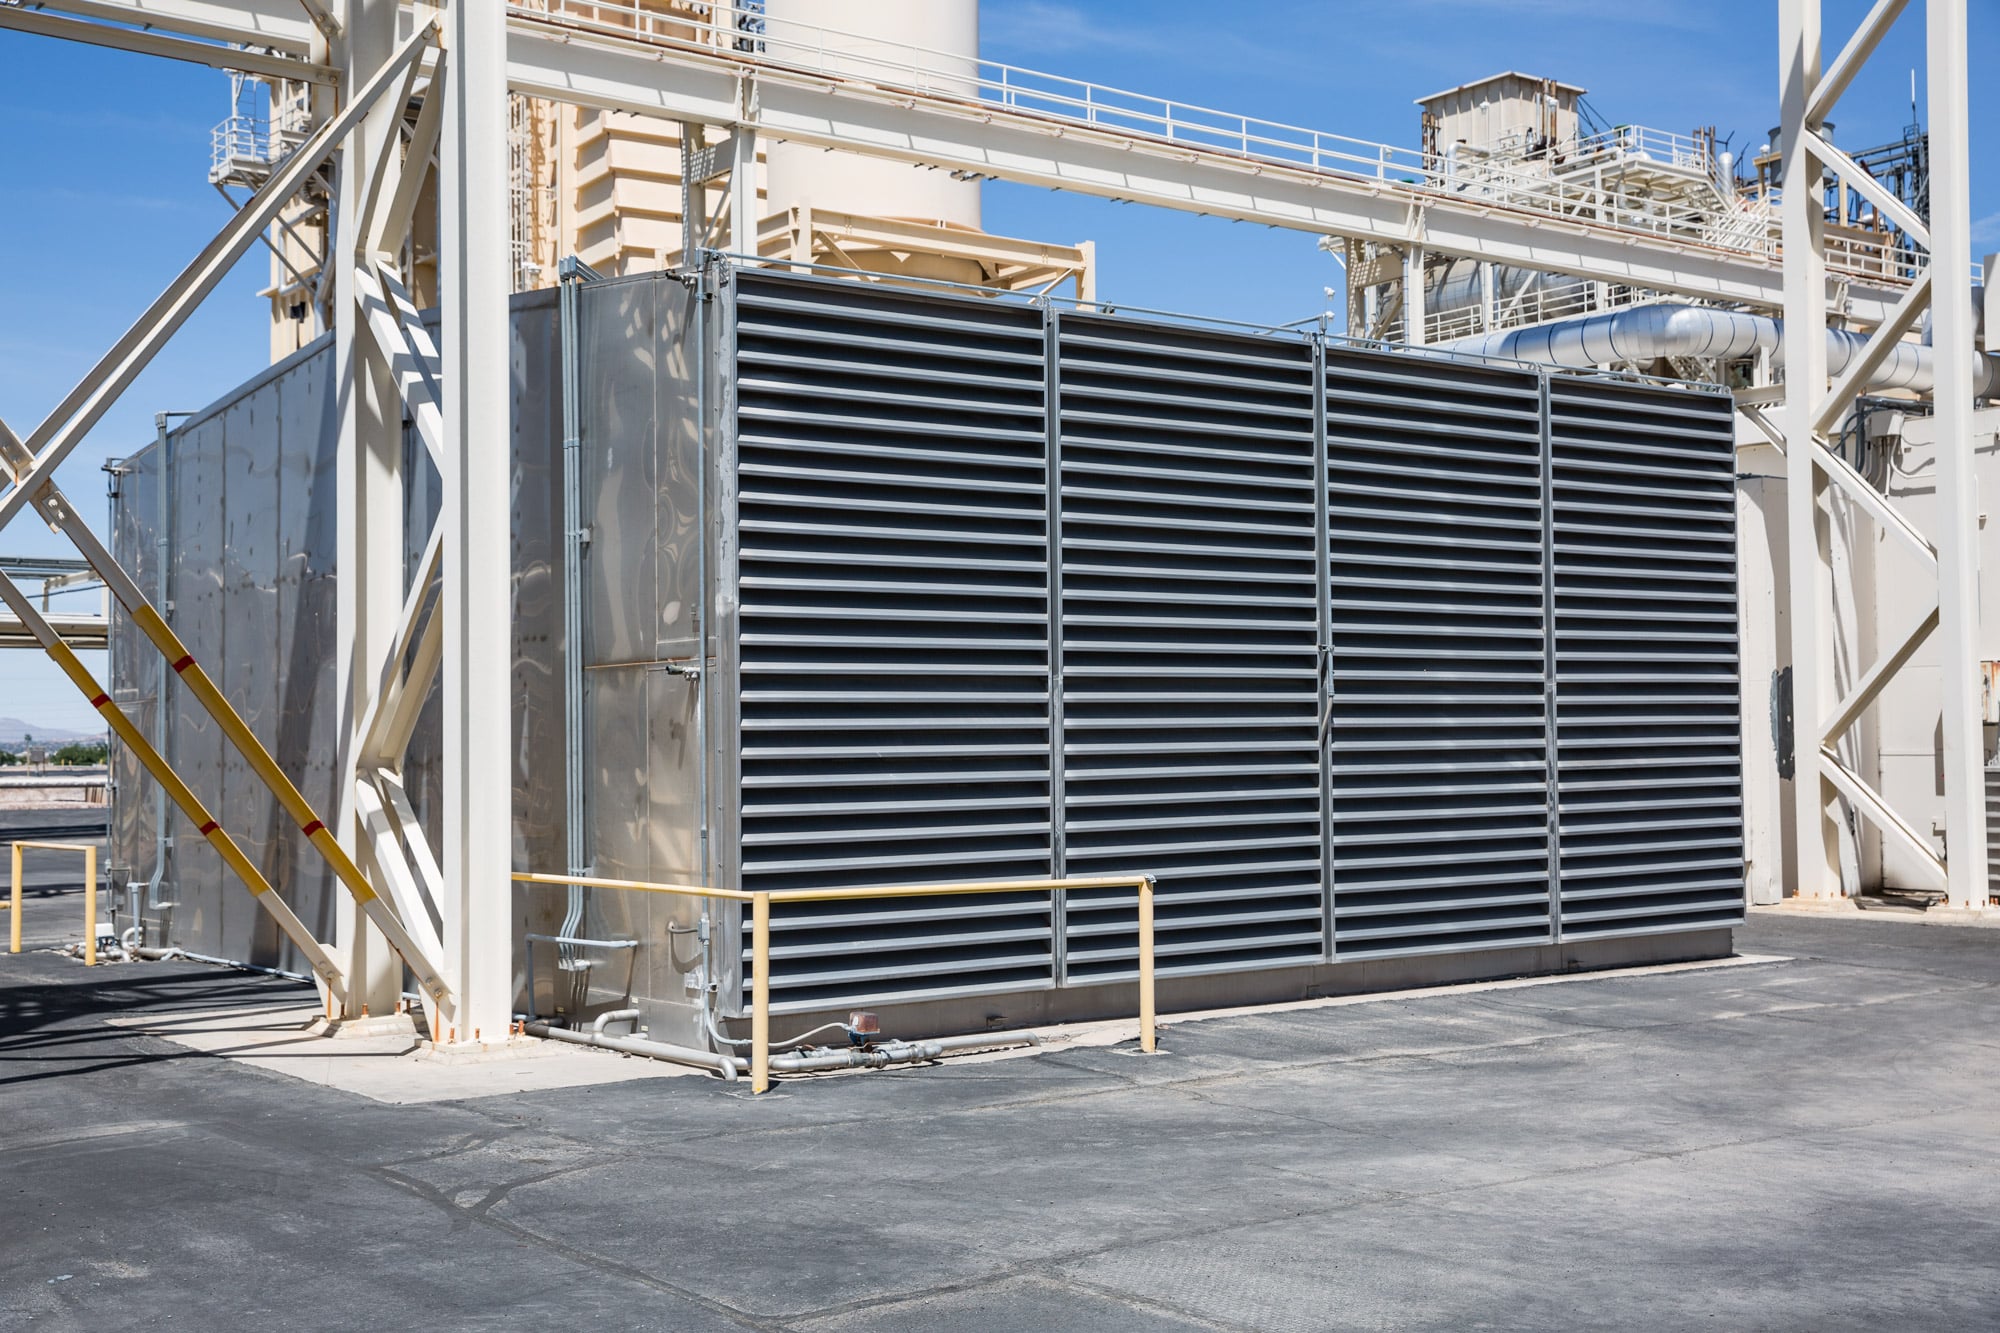 evaporative cooling hvac system on roof of warehouse